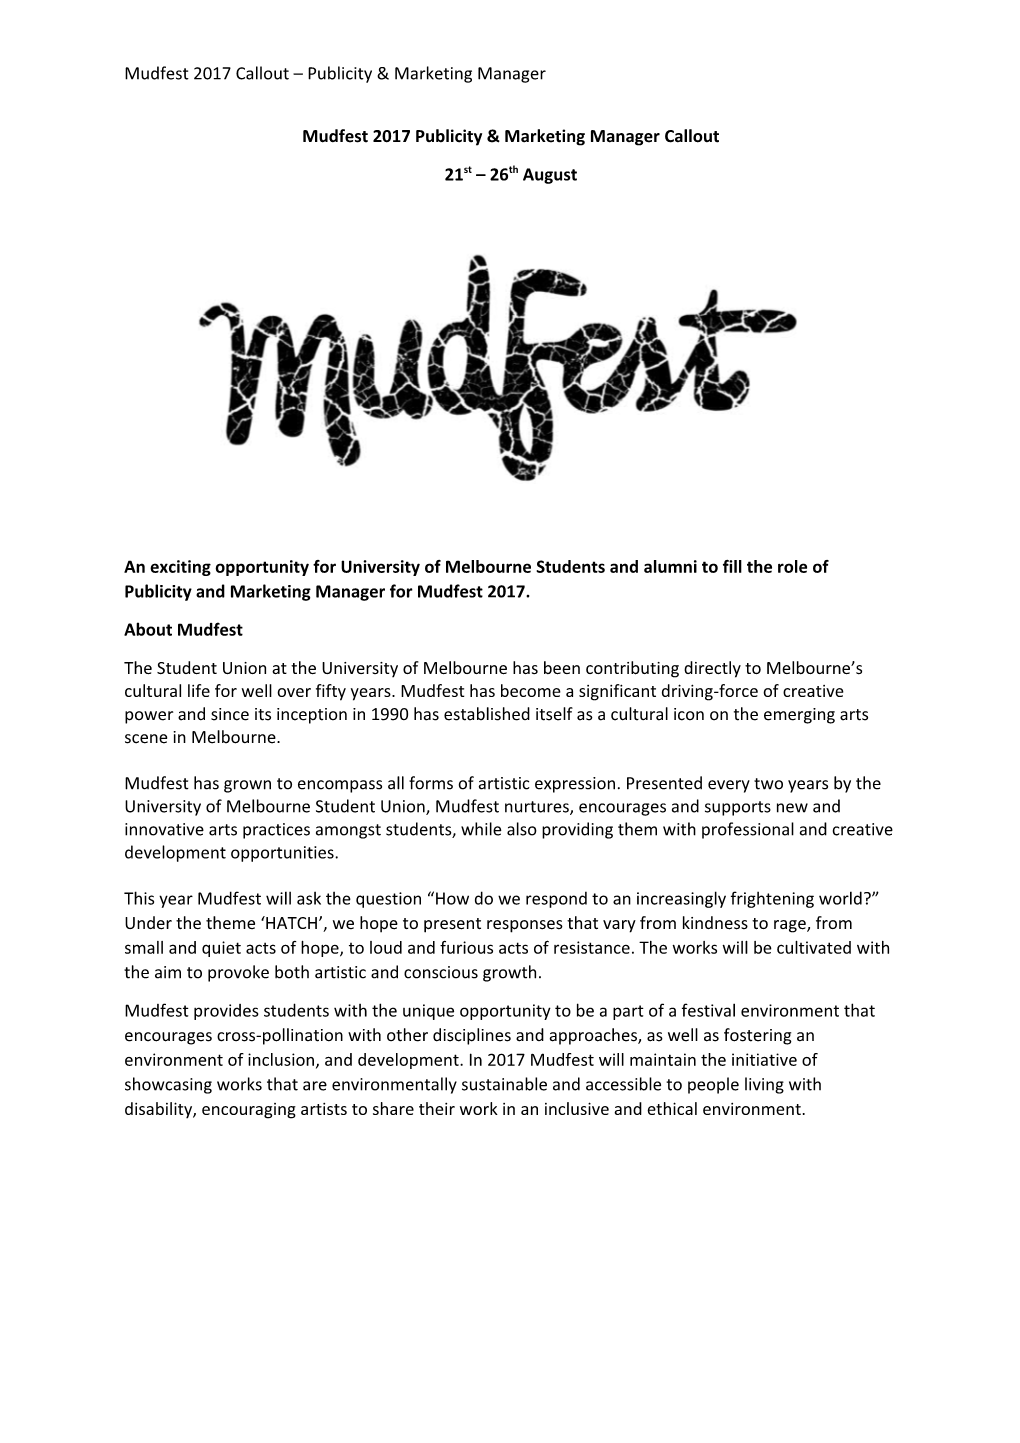 Mudfest 2017 Publicity & Marketing Manager Callout